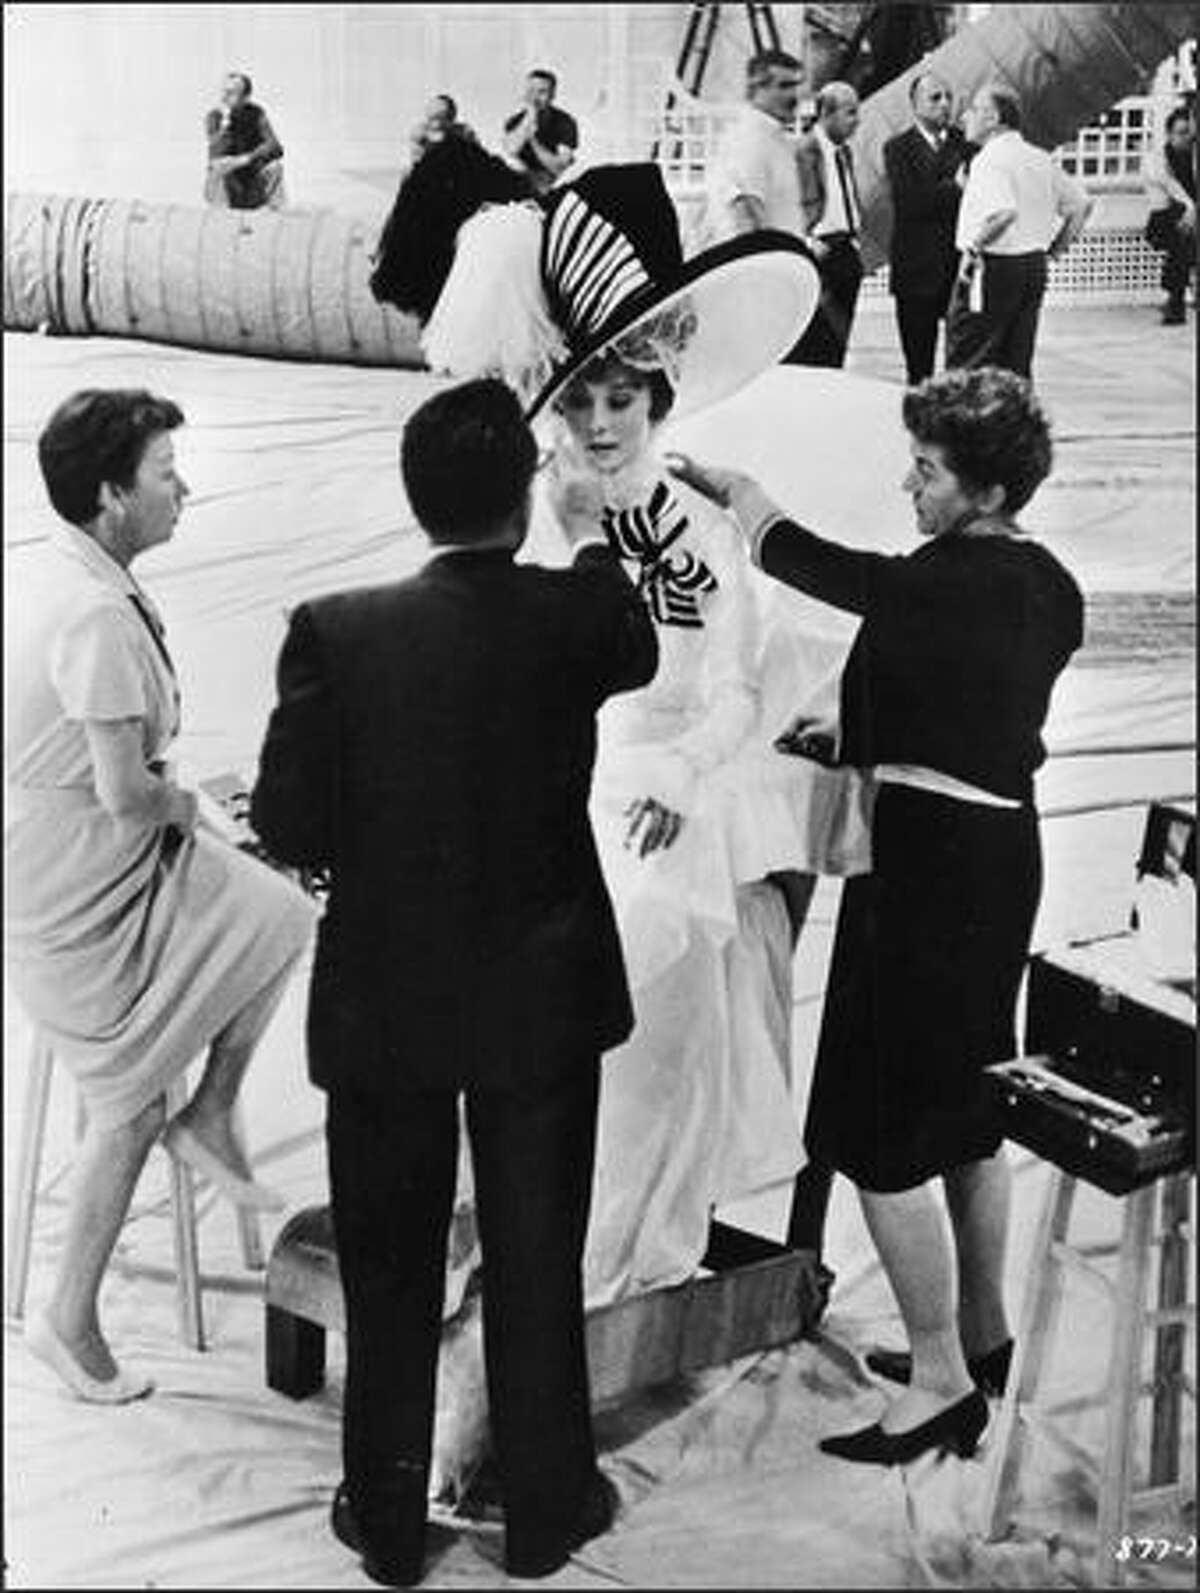 Belgian-born actor Audrey Hepburn (1929-1993) wears an elaborate costume while having her makeup done on the set of 'My Fair Lady,' directed by George Cukor, 1964.